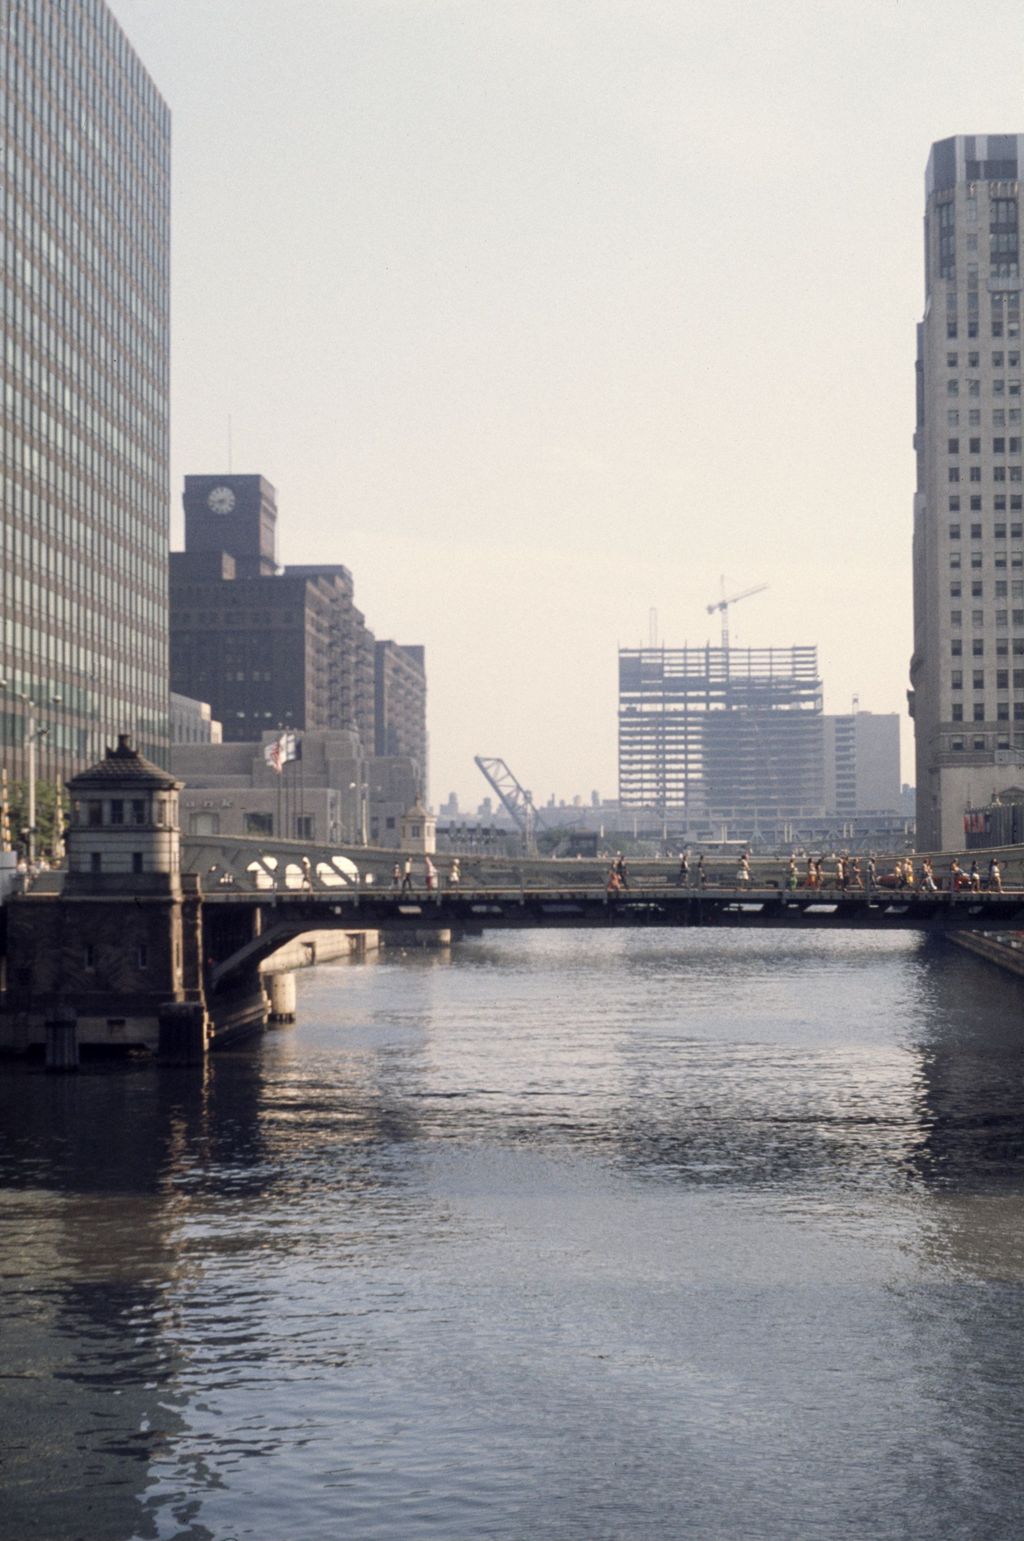 Chicago River and Apparel Center construction